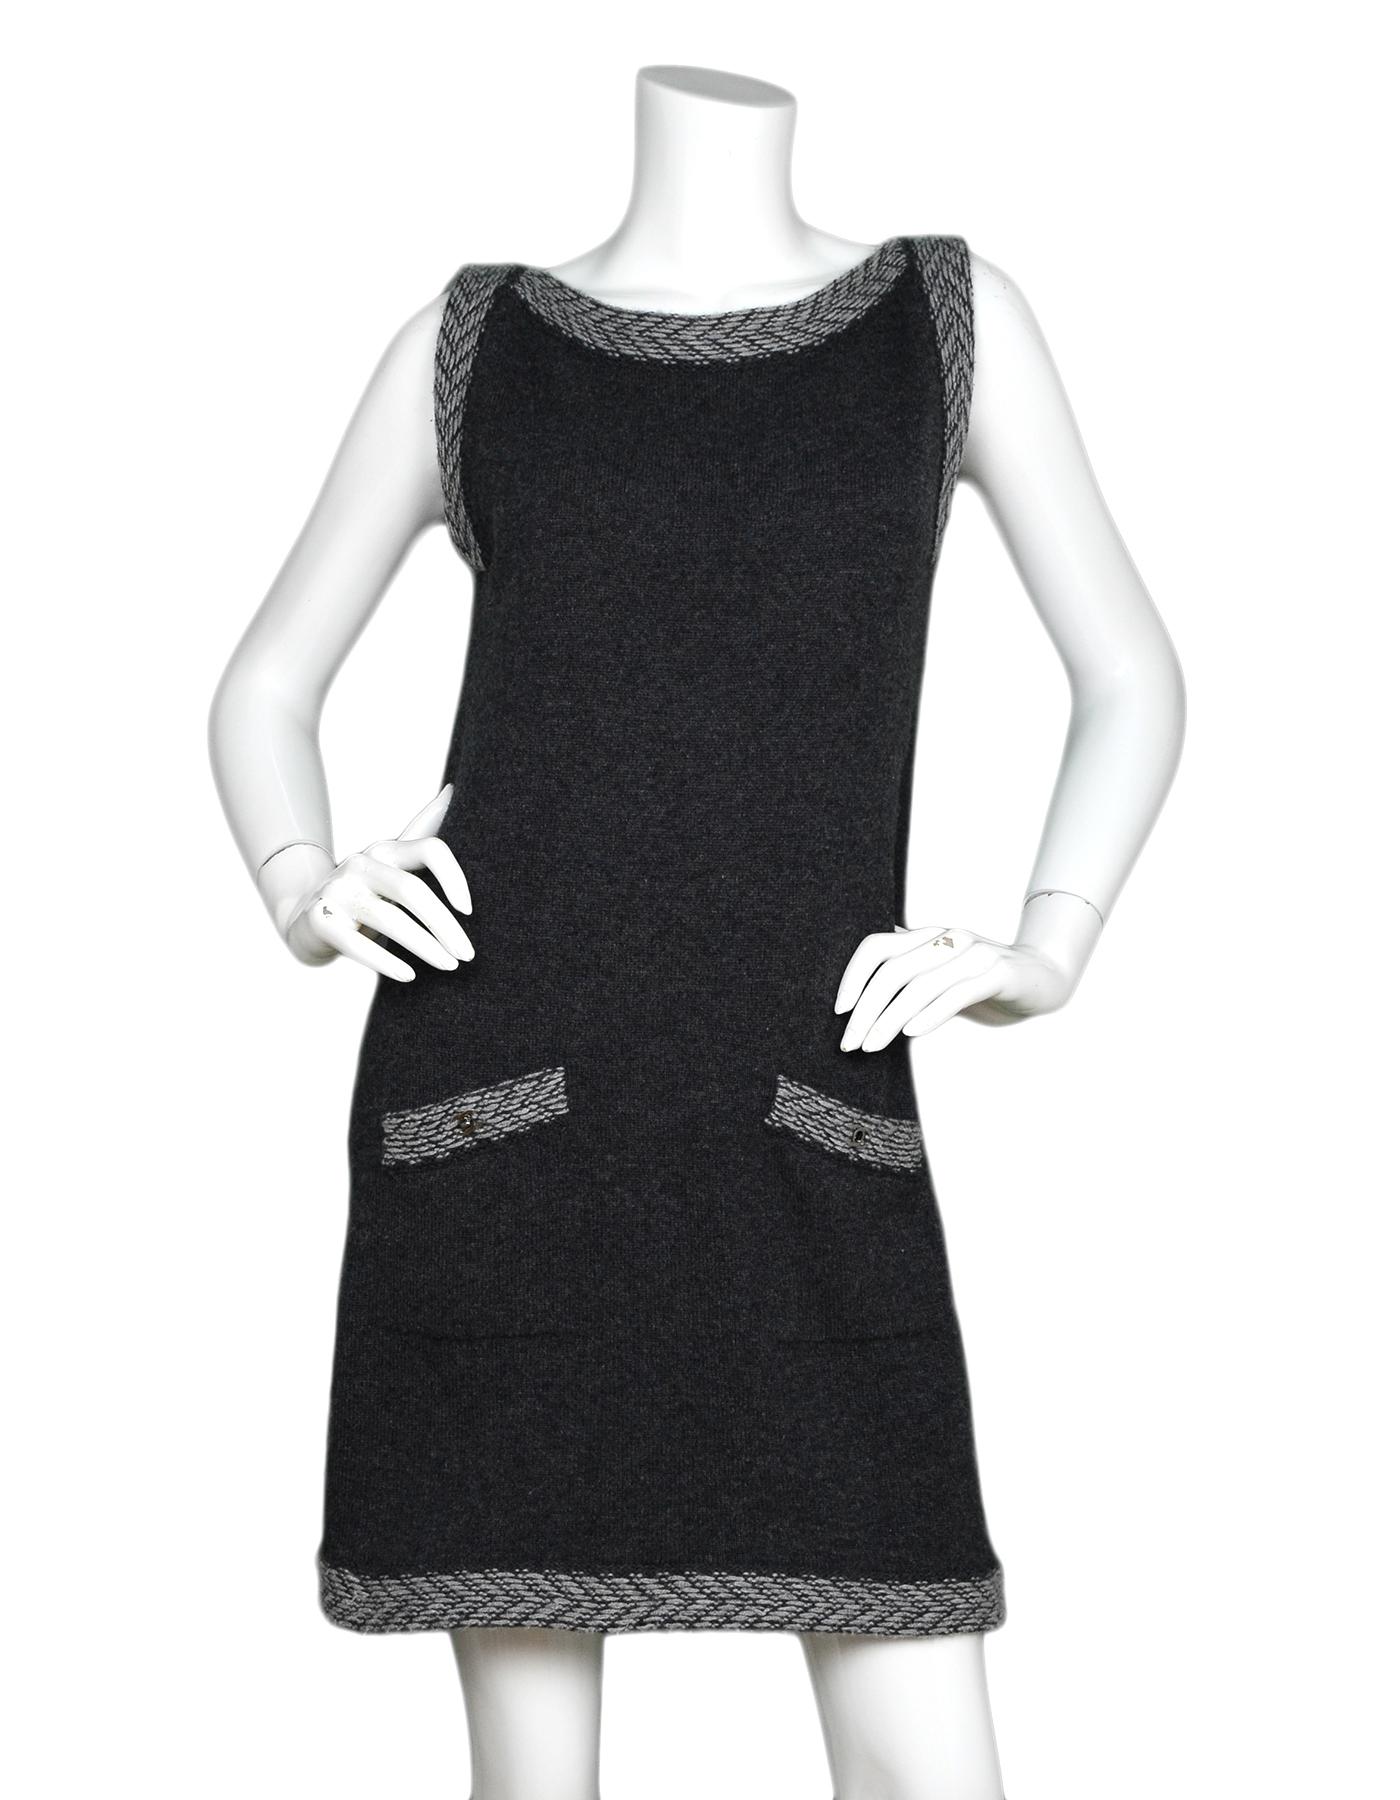 Chanel Grey Cashmere Knit Sleeveless Dress W/ CC Turnkey Pockets Sz 40

Made In: United Kingdom
Color: Grey
Materials: 100% cashmere
Opening/Closure: Pull over
Overall Condition: Very good pre-owned condition with exception of some soiling in front